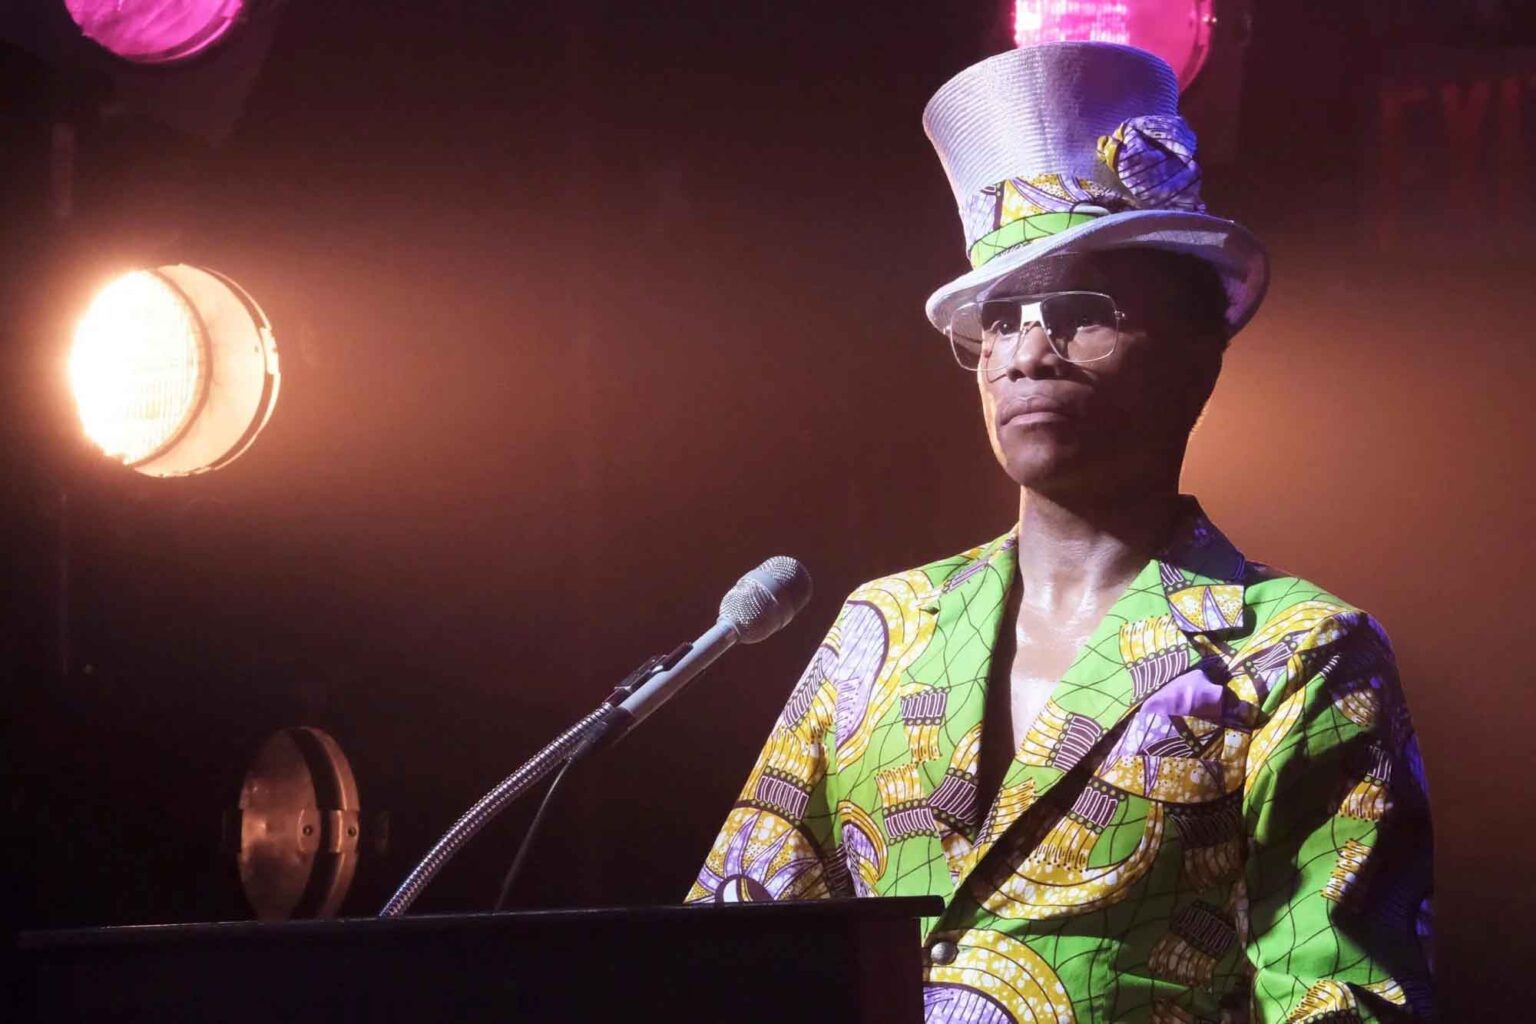 Billy Porter has been serving us jaw-dropping lewks even before he claimed his role as Pray Tell on the hit drama 'Pose'. Here's our favorites.